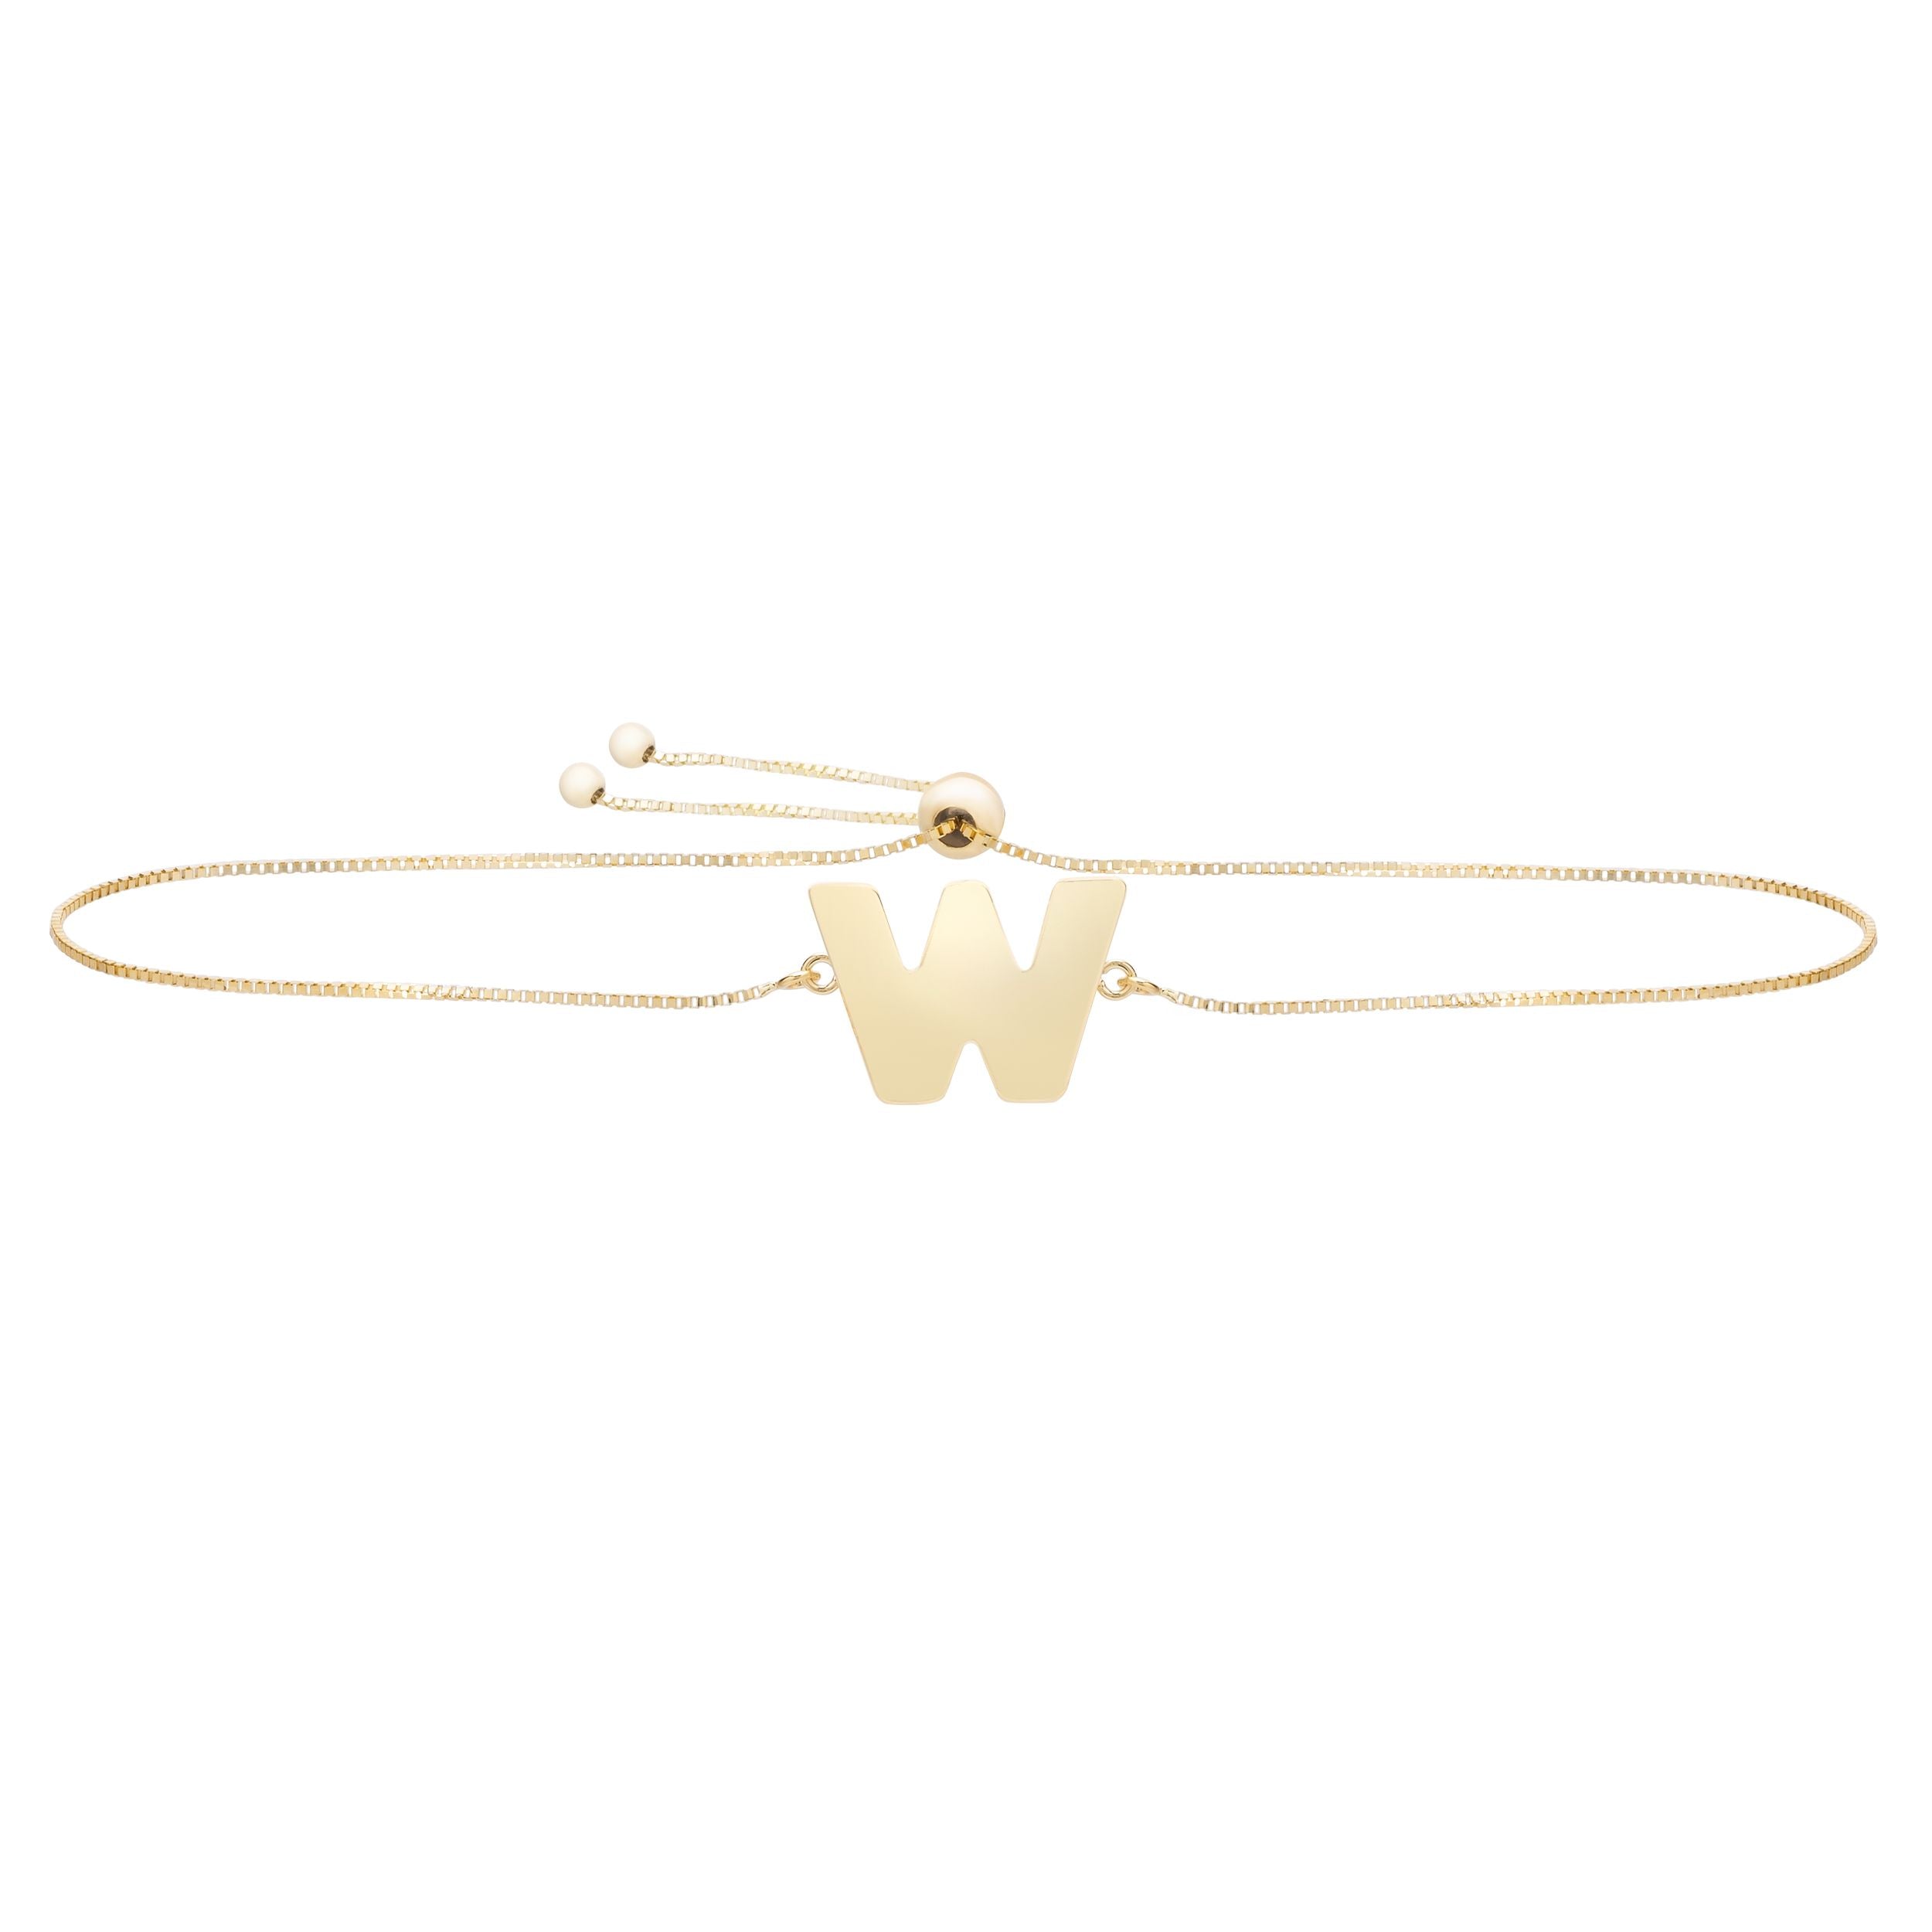 Polished Initial Alphabet Adjustable Bracelet with Draw String Clasp - wingroupjewelry